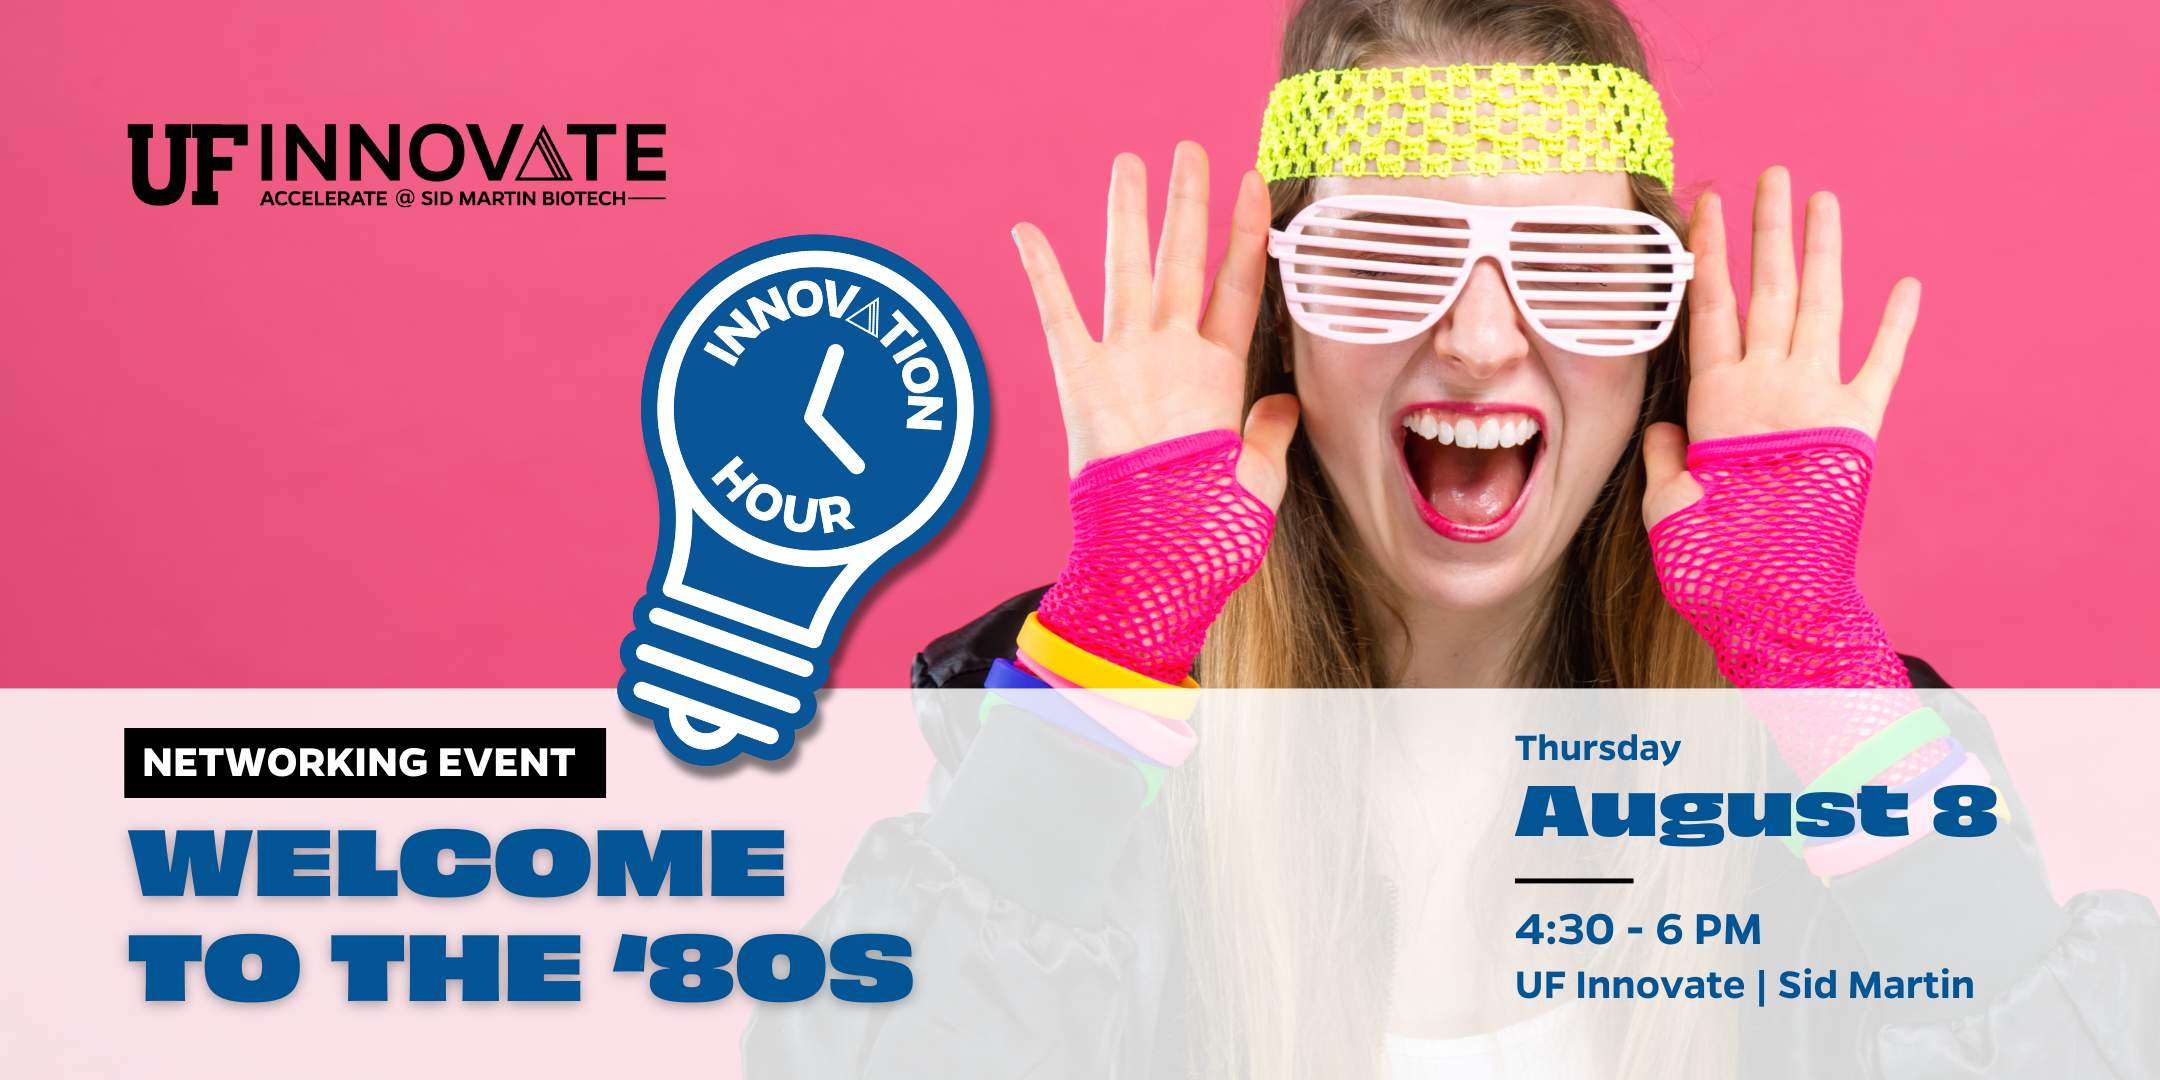 a woman in neon and funky glasses represents the 1980s theme for the Innovation Hour at UF Innovate | Sid Martin on August 8